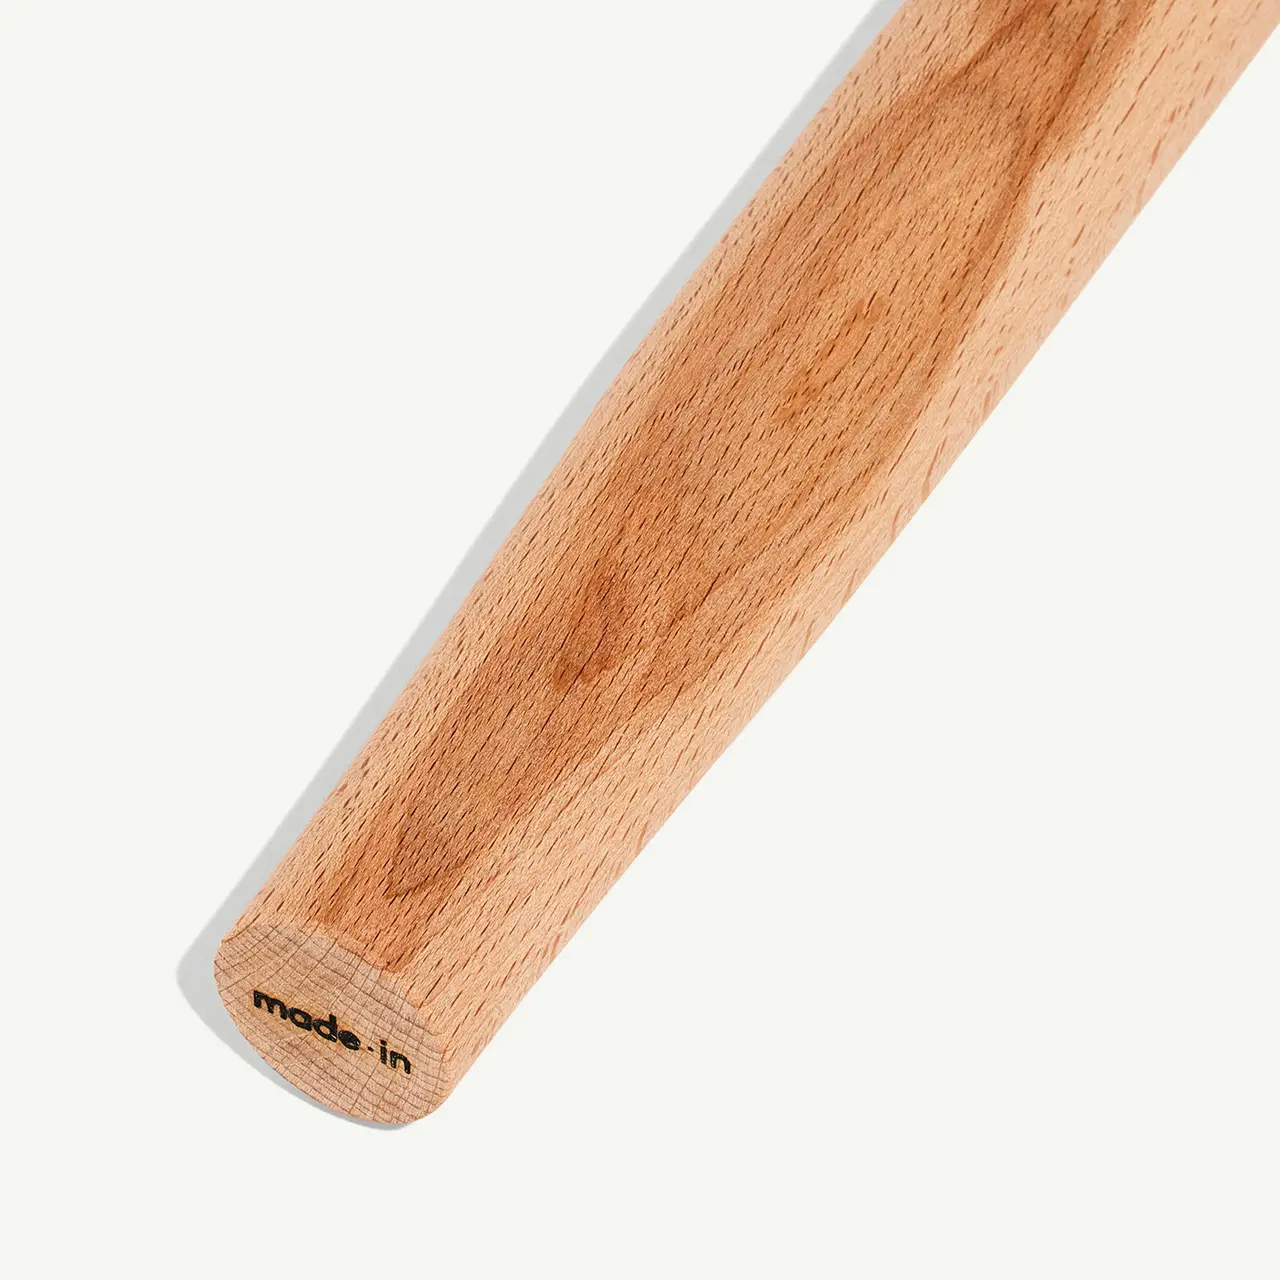 A close-up view of a wooden rolling pin with visible grain texture and a "made in" label on the handle.